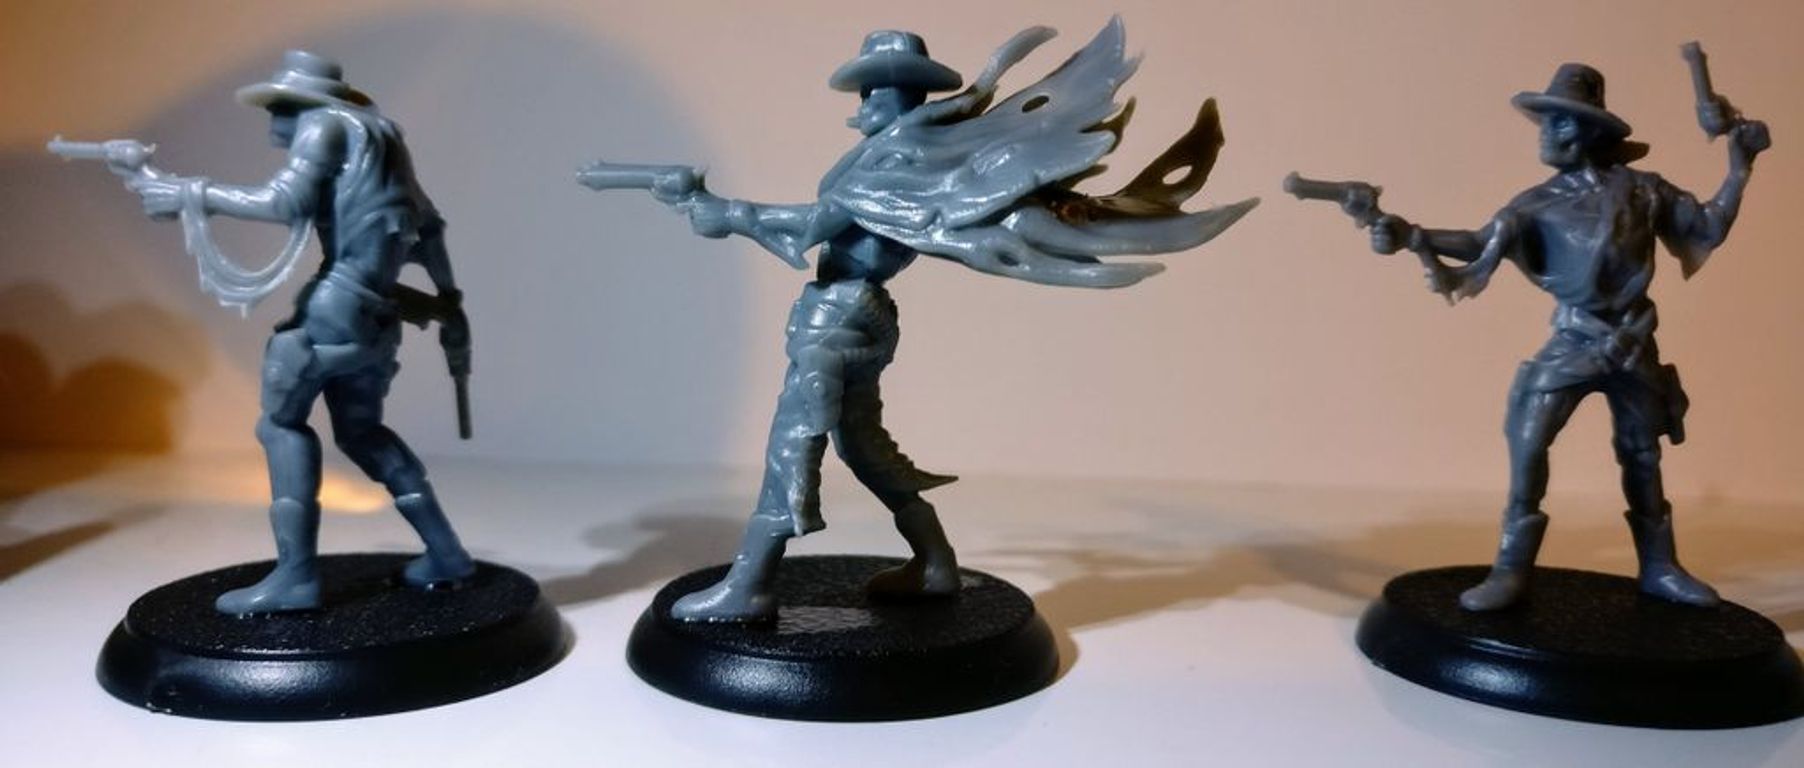 Shadows of Brimstone: Undead Outlaws Deluxe Enemy Pack miniaturas